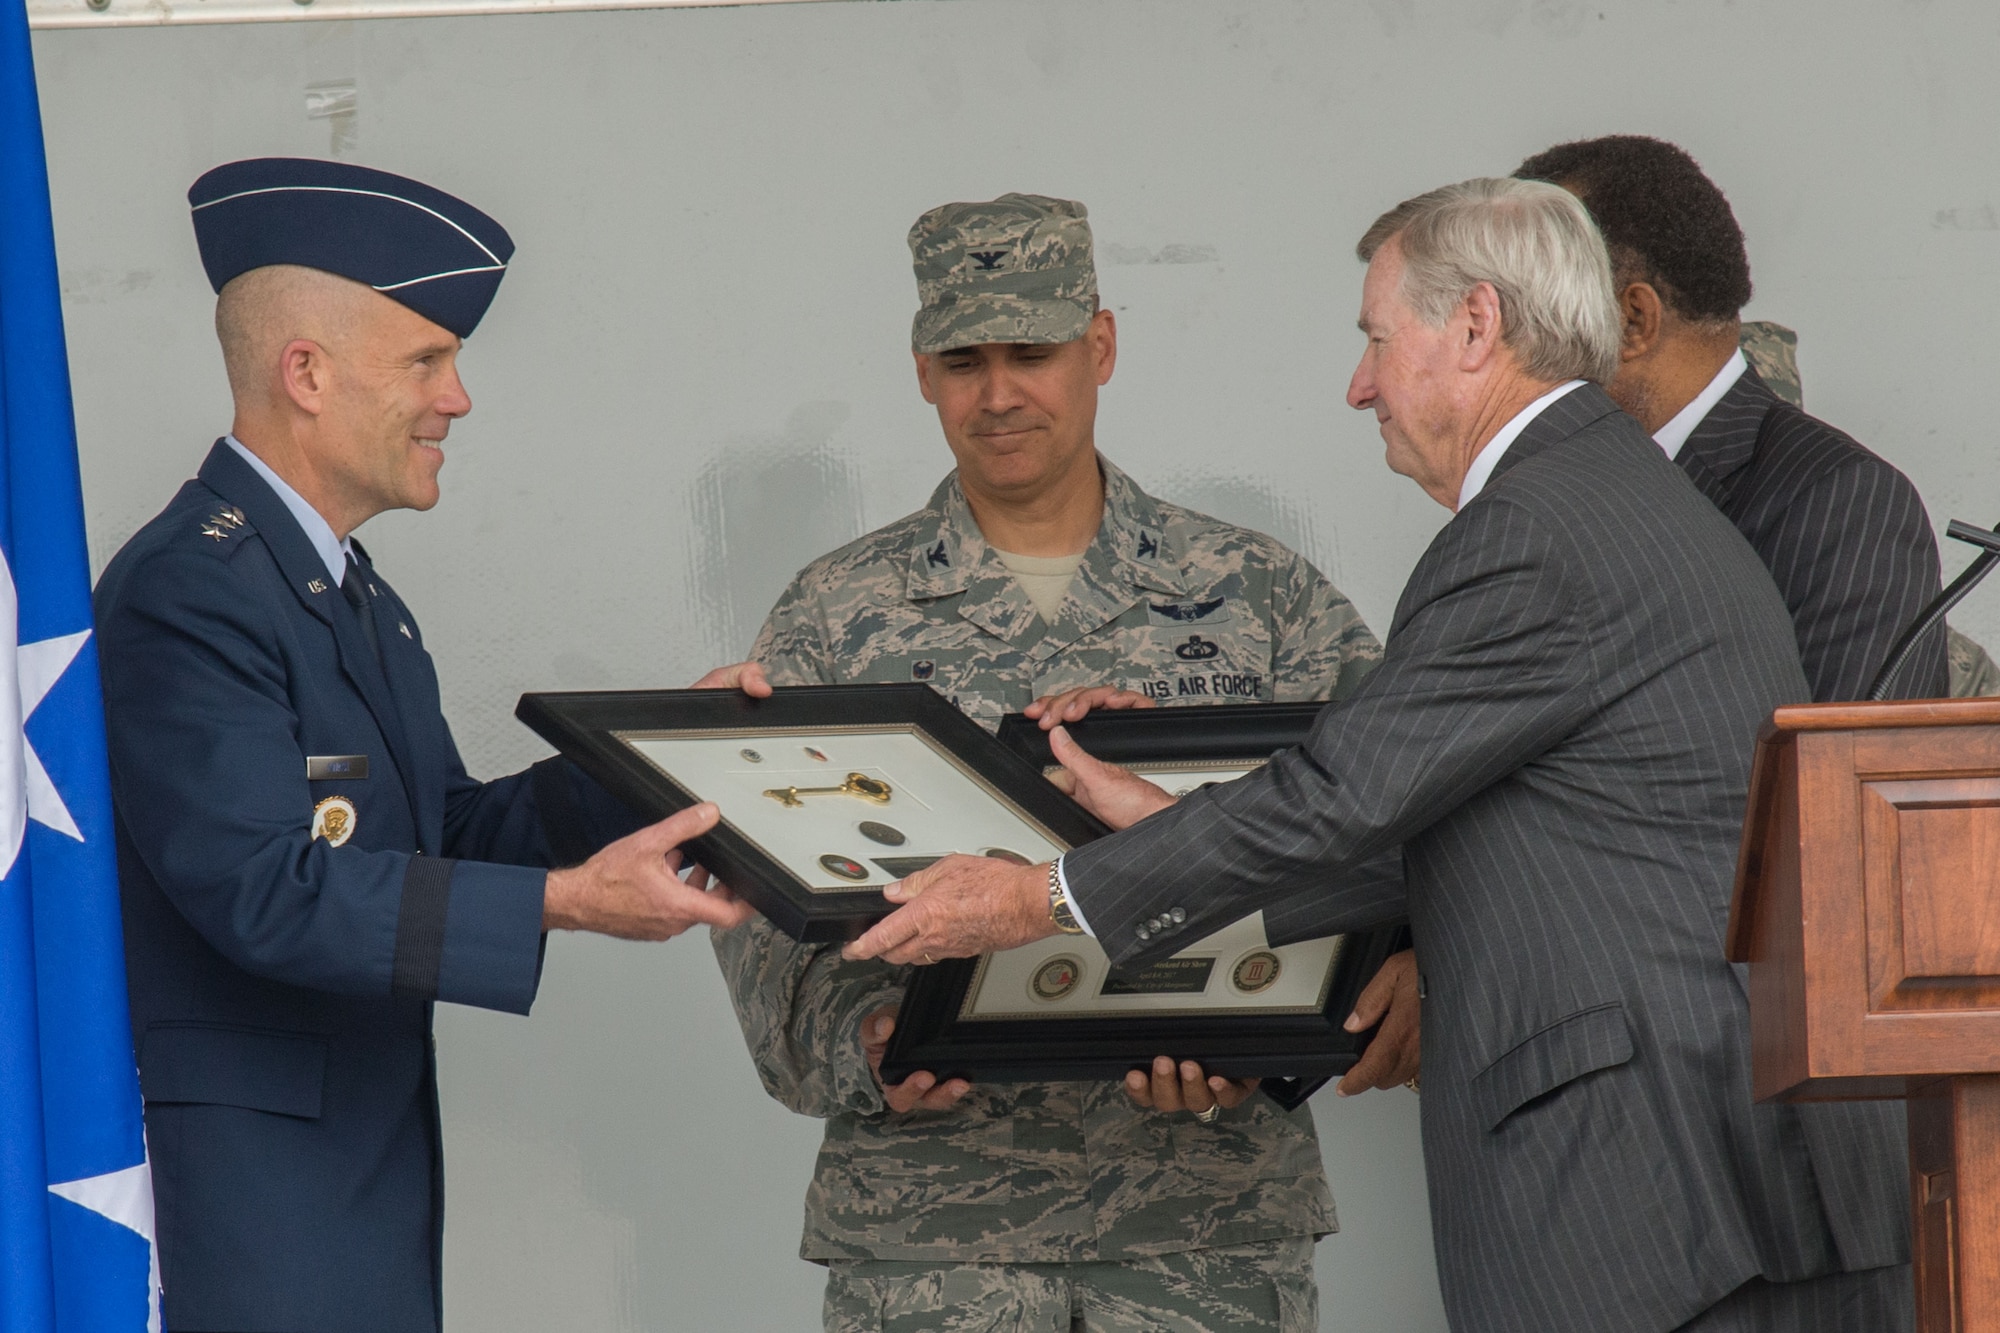 Montgomery Mayor Todd Strange presents the Keys to the City to Lt. Gen. Steven Kwast, Air University commander, and Col. Eric Shafa, 42nd Air Base Wing commander, April 17, 2017. The mayor presented the keys as a show of appreciation for the Maxwell Air Force Base “Heritage to Horizon” Air Show, April 8-9, 2017. The International Council of Air Shows awarded Maxwell the Dick Schram Memorial Community Relations Award for having the best air show in 2017. (U.S. Air Force photo by Trey Ward)